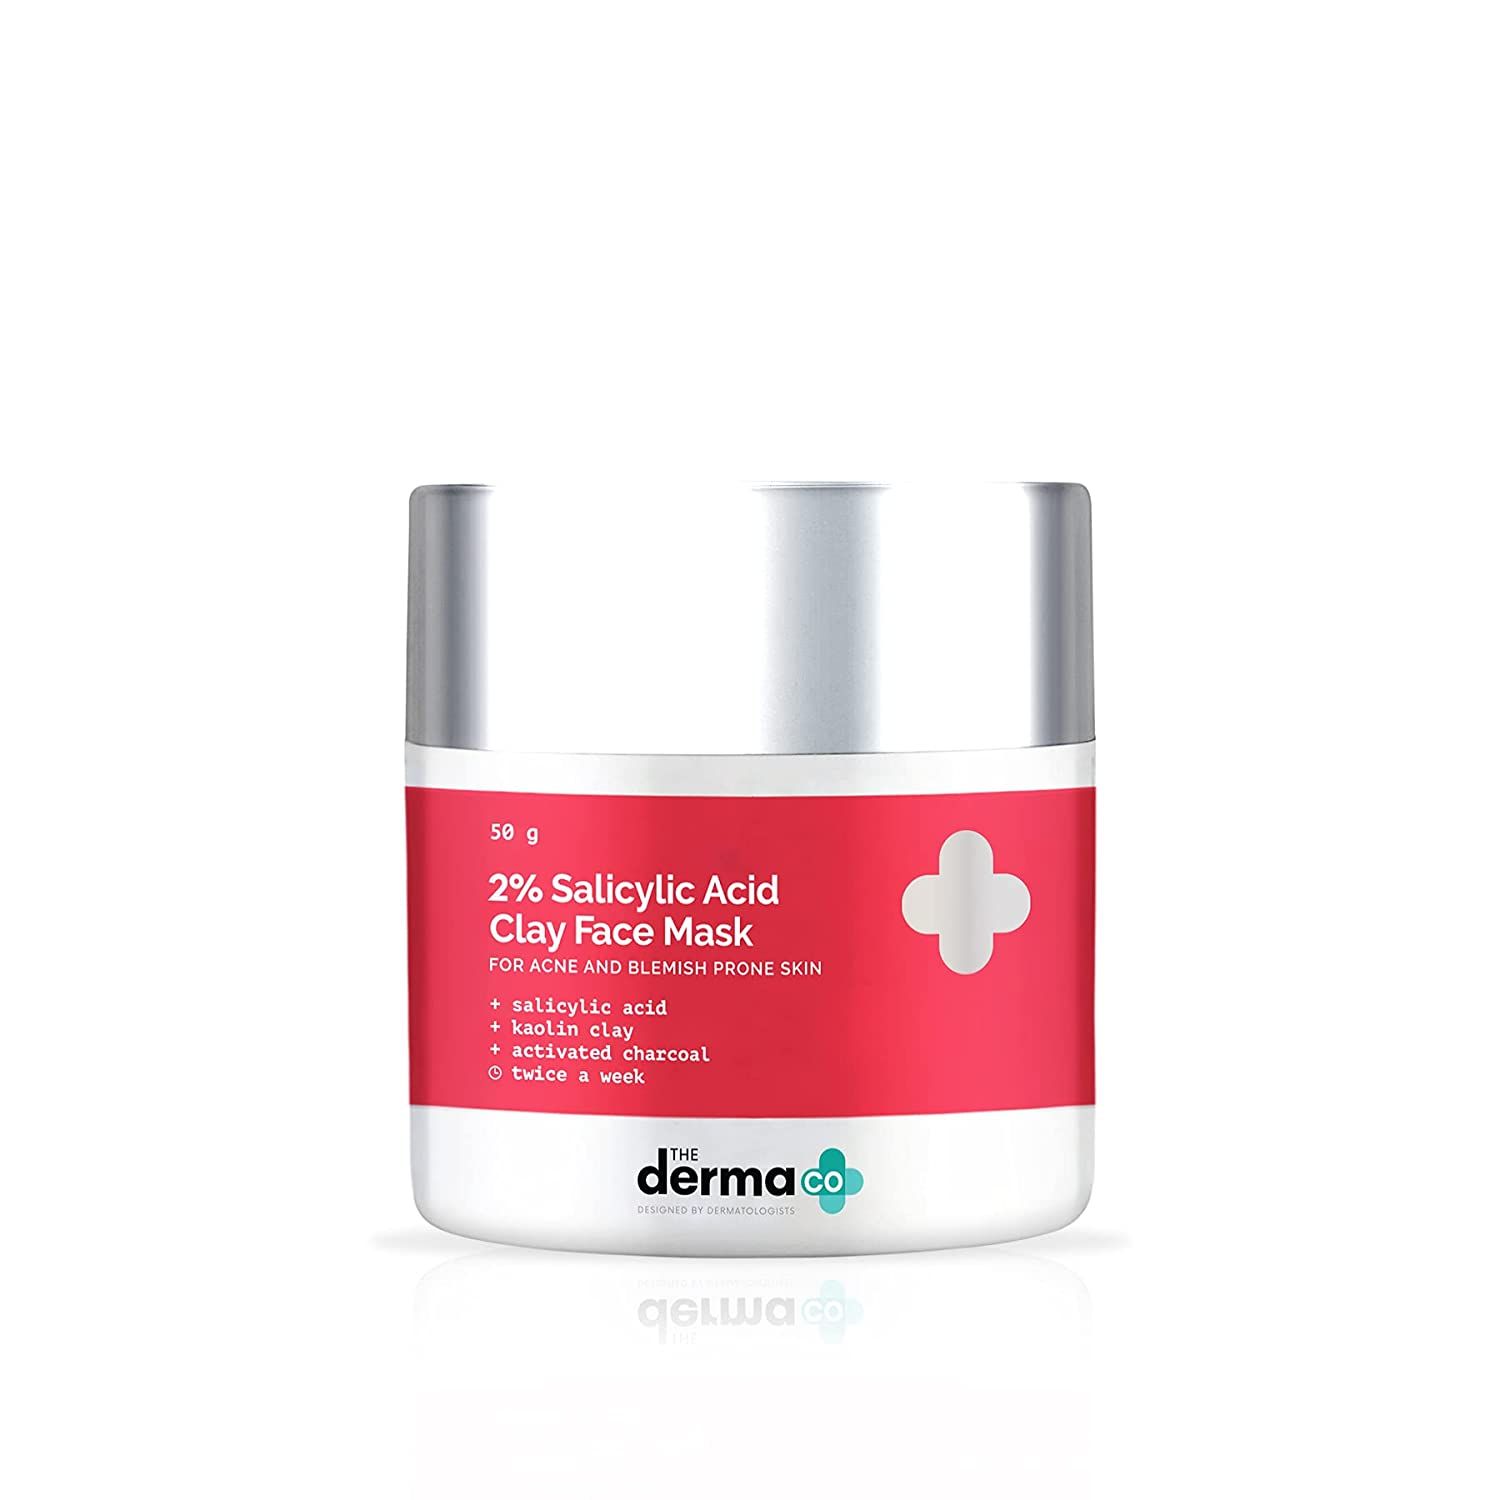 Buy The Derma co.2% Salicylic Acid Clay Face Mask for Acne & Blemish Prone Skin (50 g) - Purplle